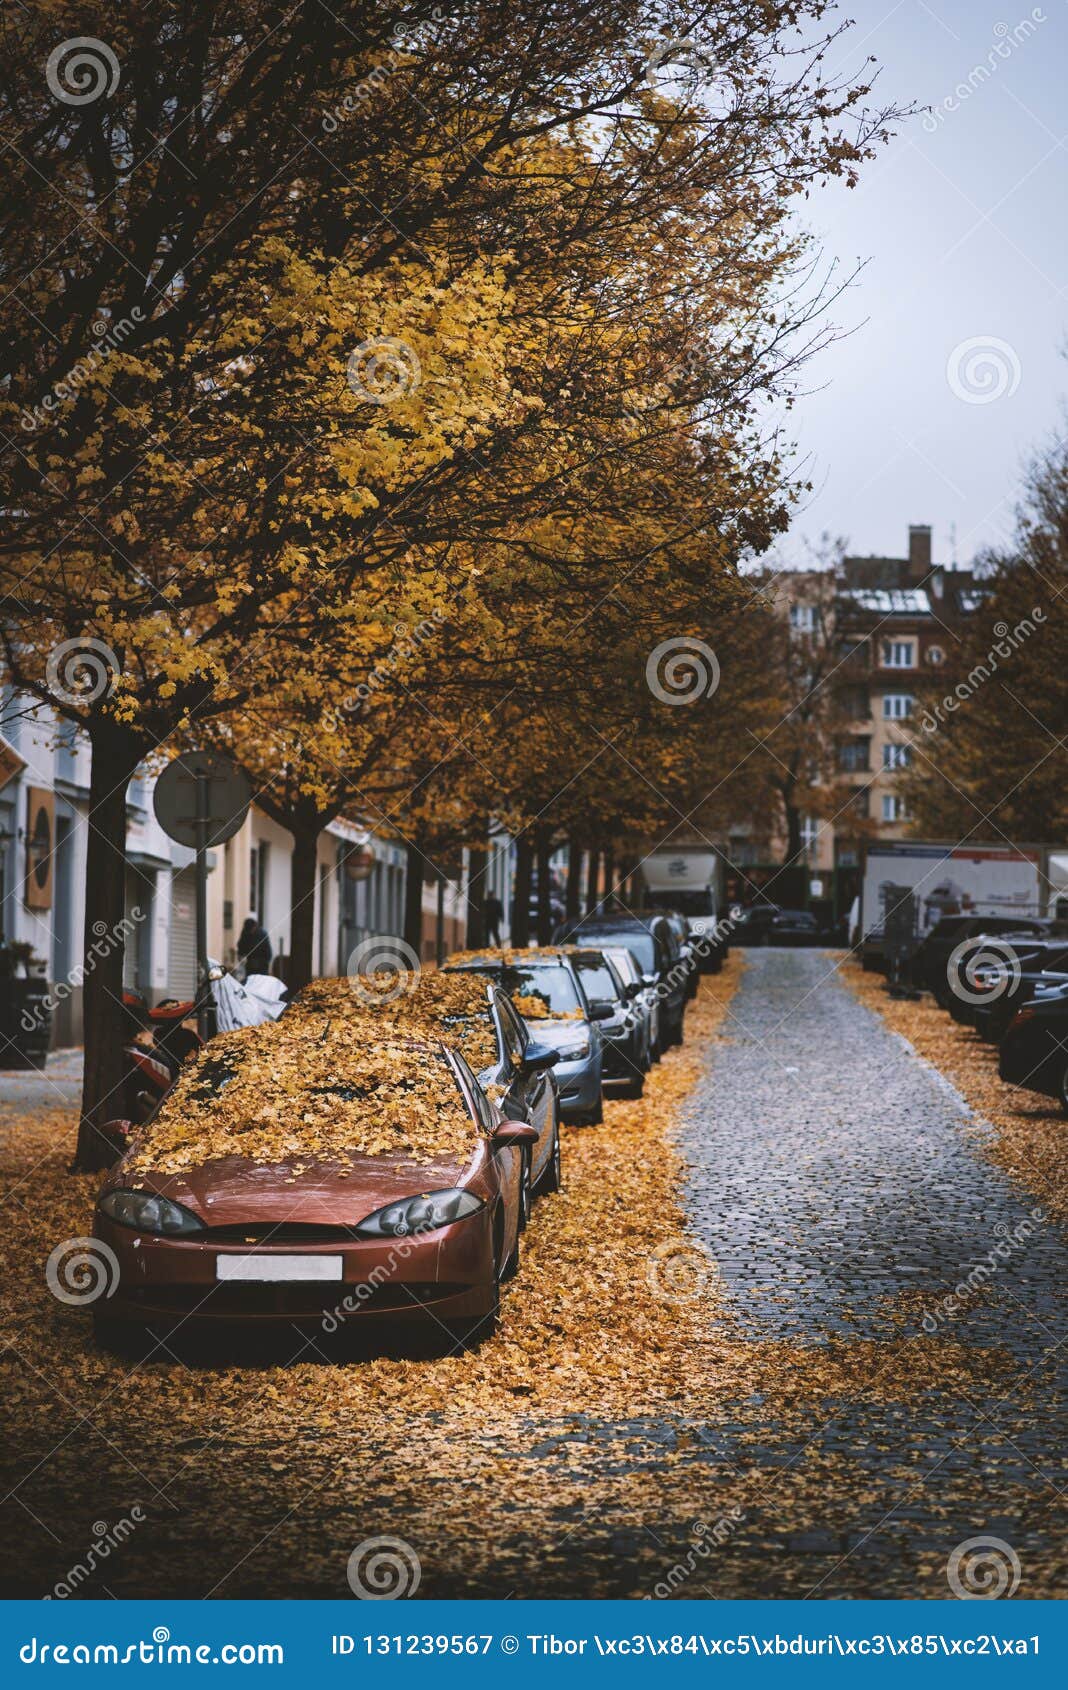 Moody Day In The City Orange Yellow Leaves On The Cars During A Autumn Period Prague City In A Europe Fall Background With Veh Stock Image Image Of Fall Rain 131239567 Download and use 10,000+ orange background stock photos for free. https www dreamstime com moody day city orange yellow leaves cars autumn period prague europe fall background veh vehicles street image131239567